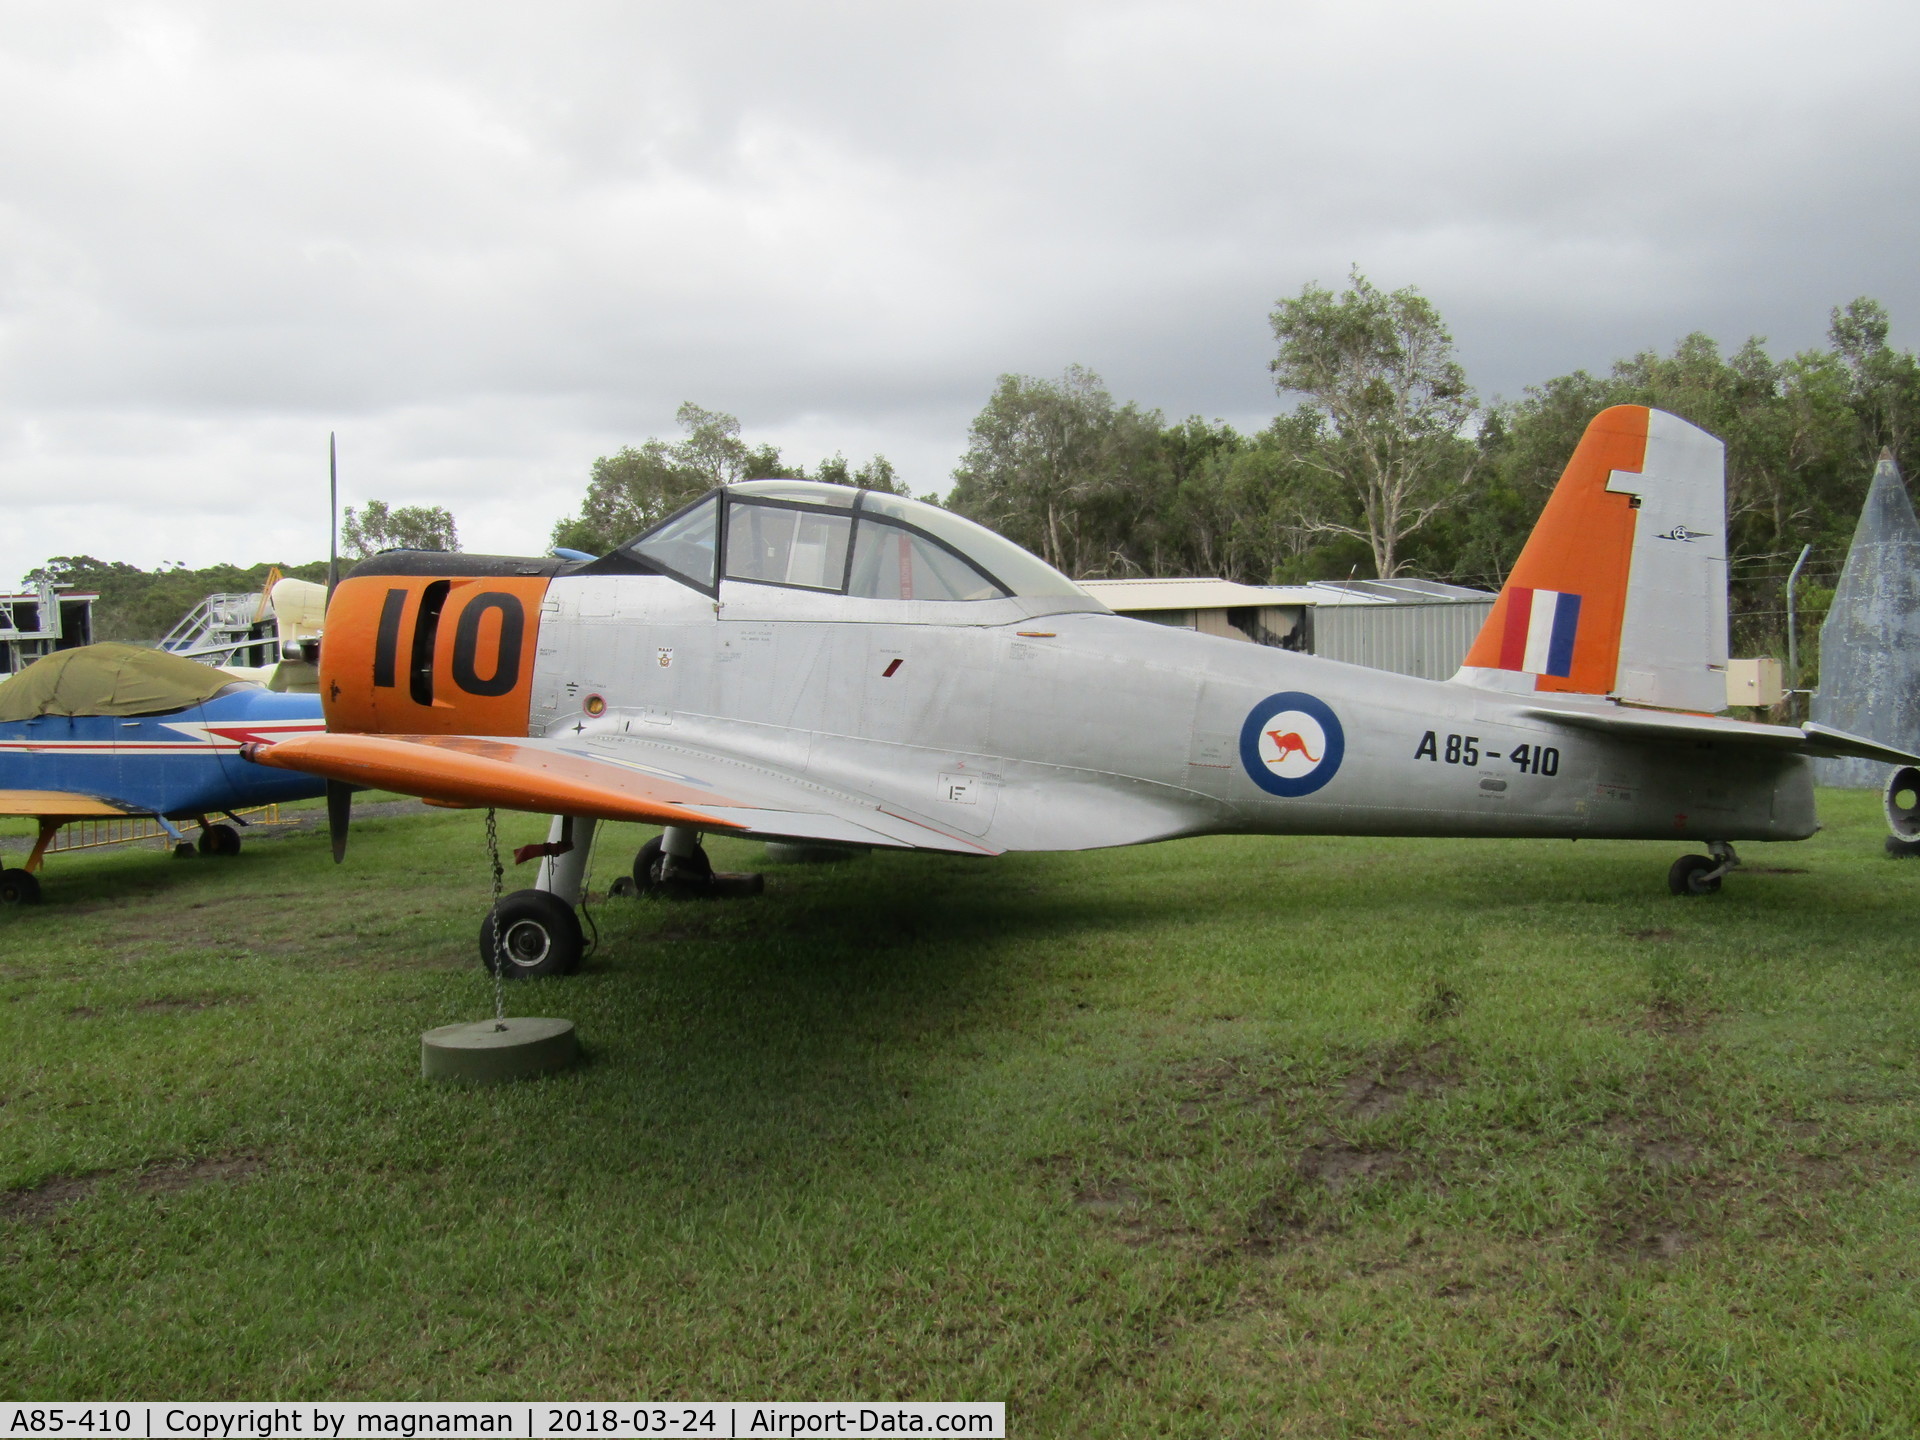 A85-410, 1955 Commonwealth CA-25 Winjeel C/N CA25-10, At Caloundra Museum - qld